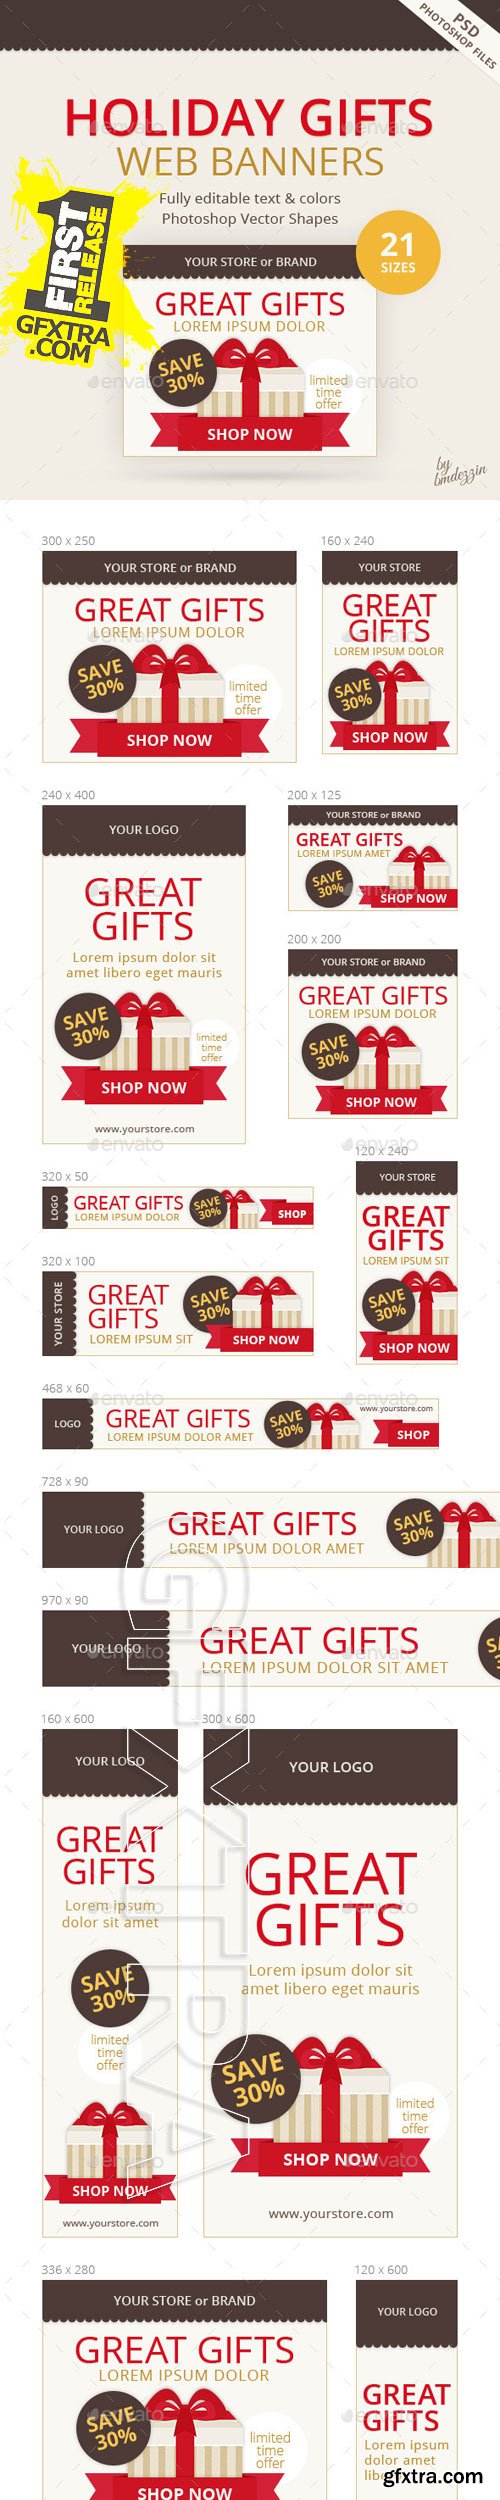 GraphicRiver - Holiday Gifts Web Banners